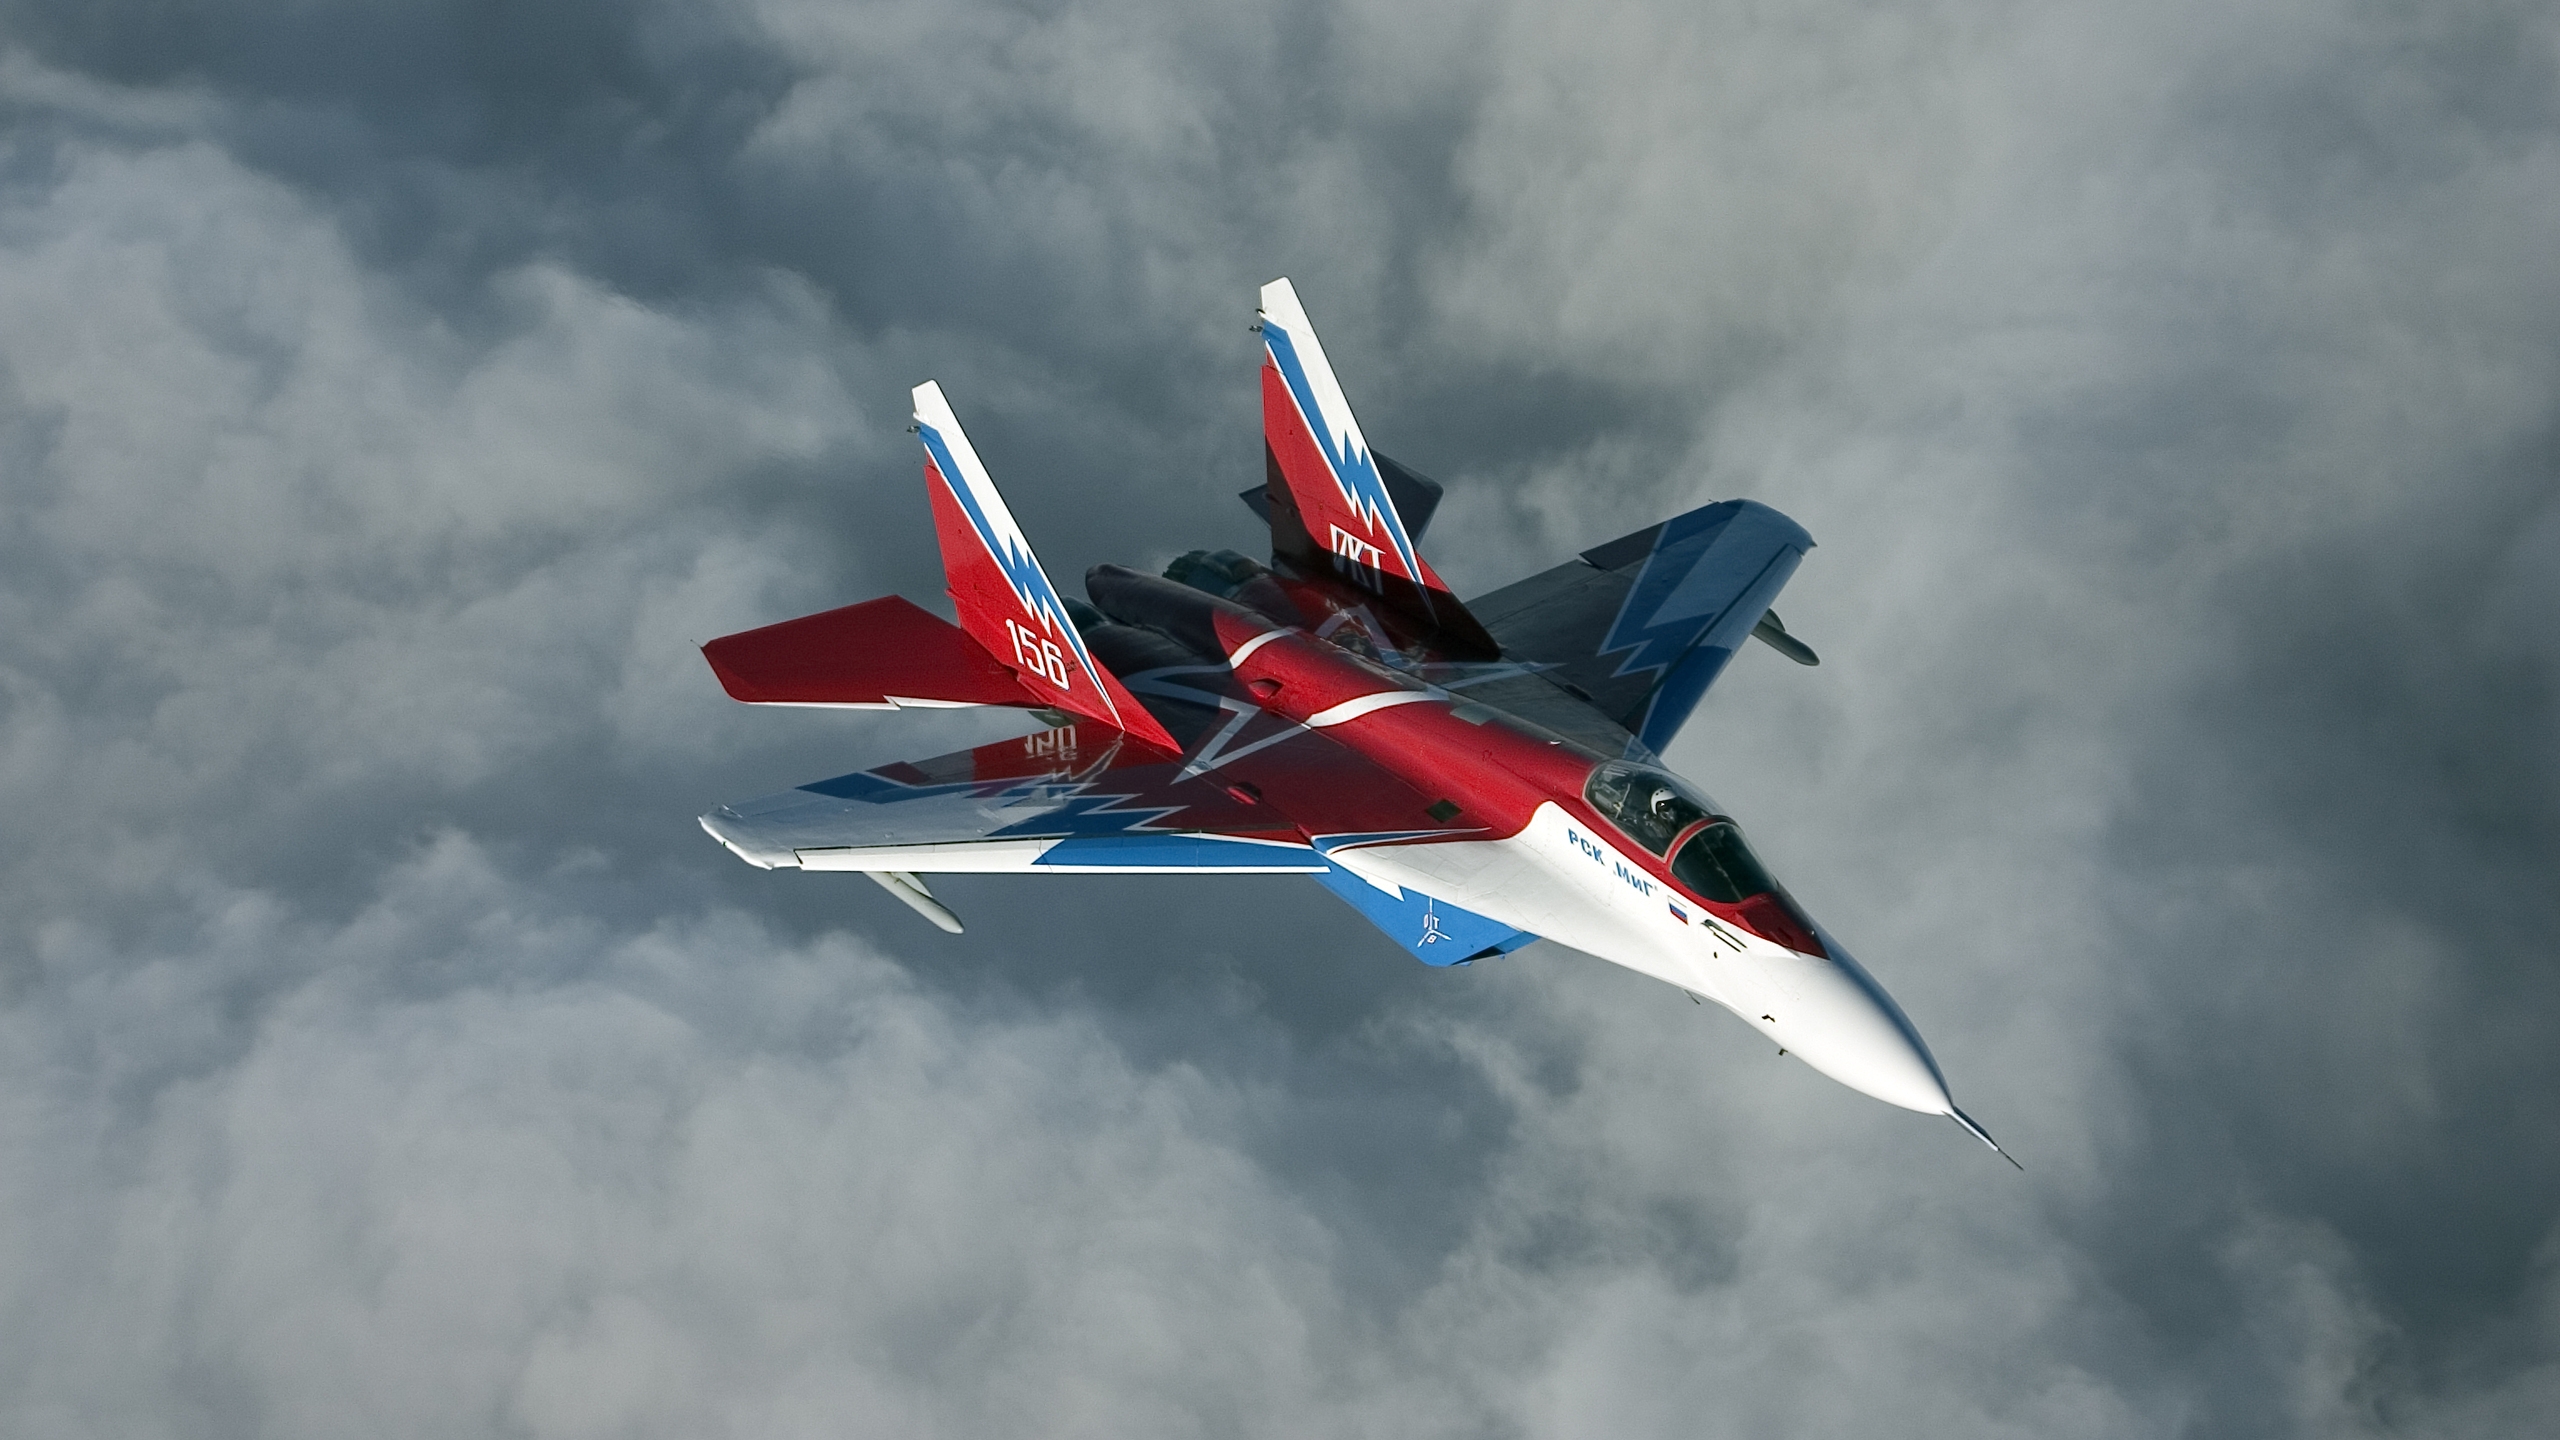 MiG 29M OVT for 2560x1440 HDTV resolution